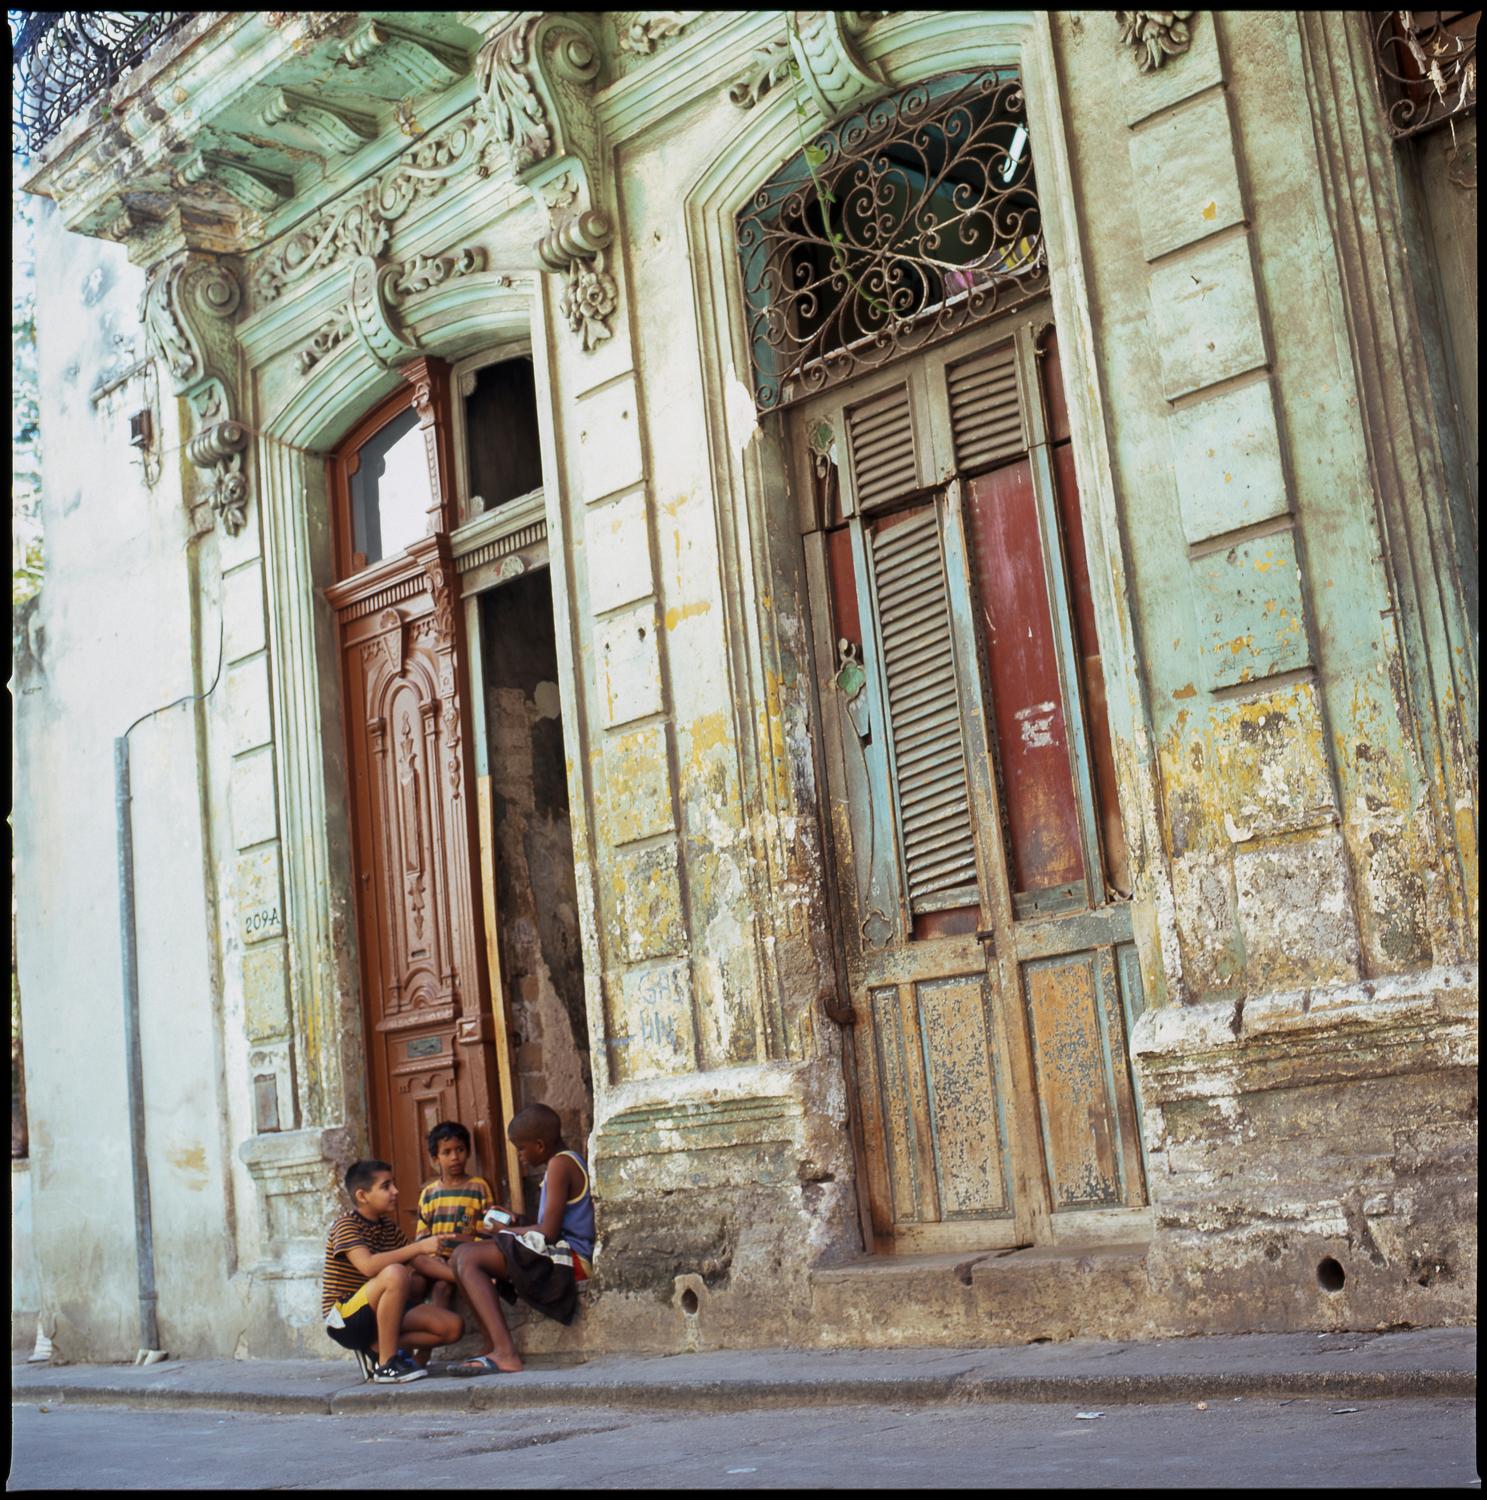 [Featured in Italian Vogue. The print will not display the watermark]

Edition 1/10 - Street Children, Old Havana, Cuba , C-Type Photograph

Edition of 10 + 5 APs.
Front: Signature and edition number with artists blind stamp.  
Back: Ink stamp and